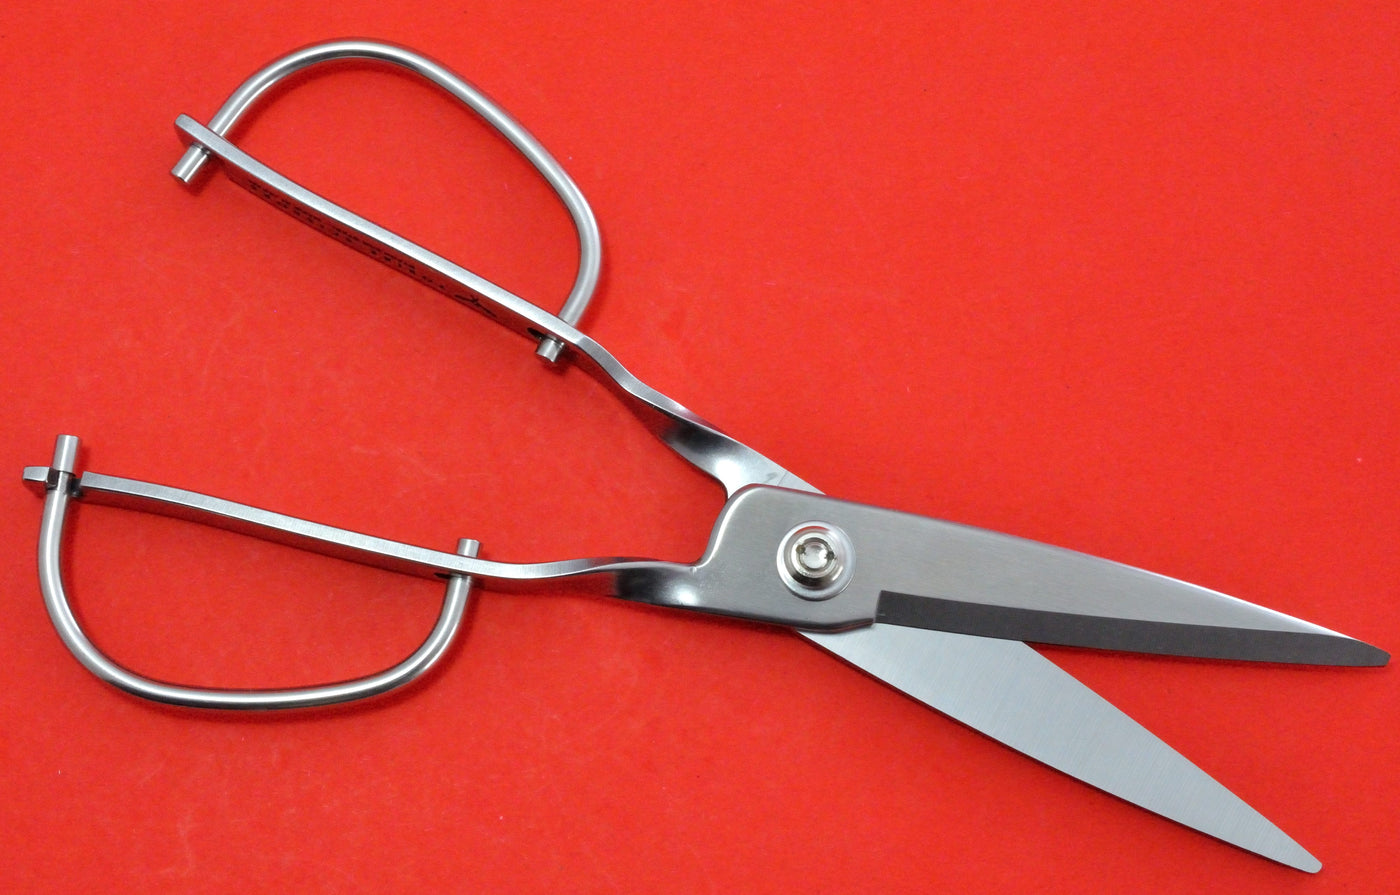 Enso Kitchen Shears - Stainless Steel, Made in Japan